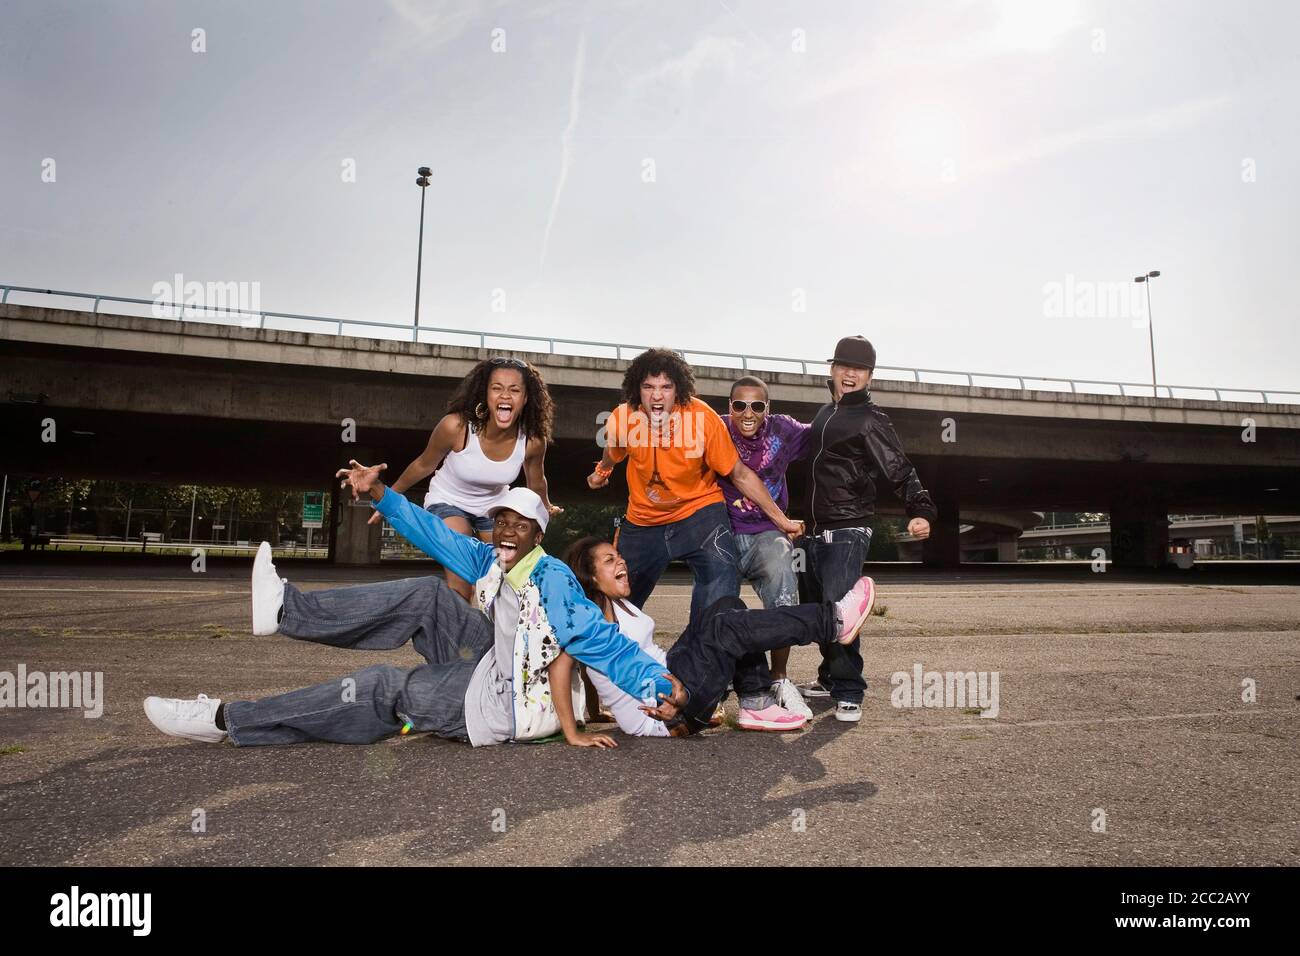 Germany, Cologne, Group of people shouting, portrait Stock Photo